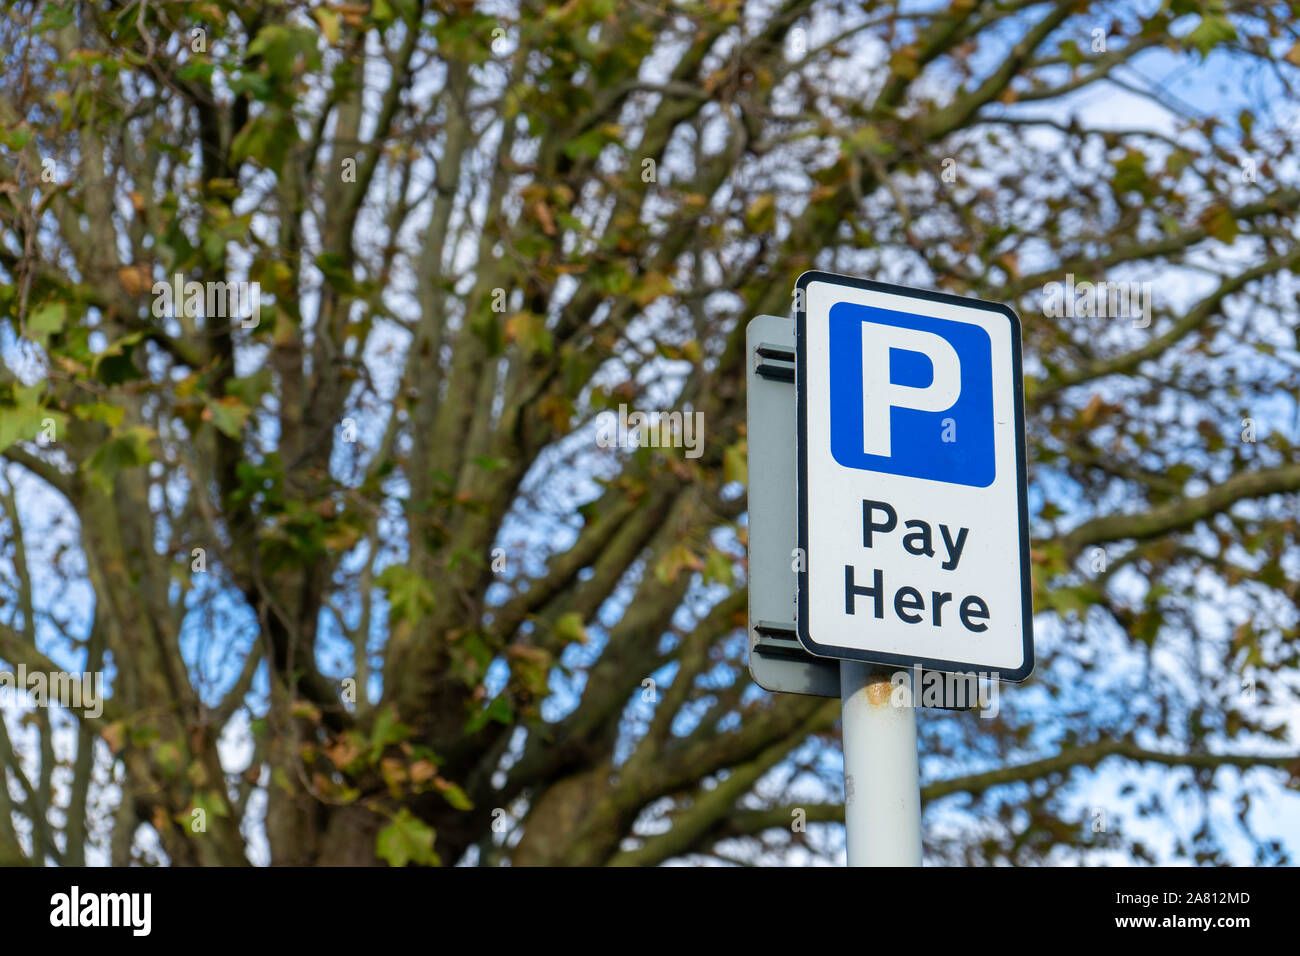 A parking pay here sign on a lamp post Stock Photo